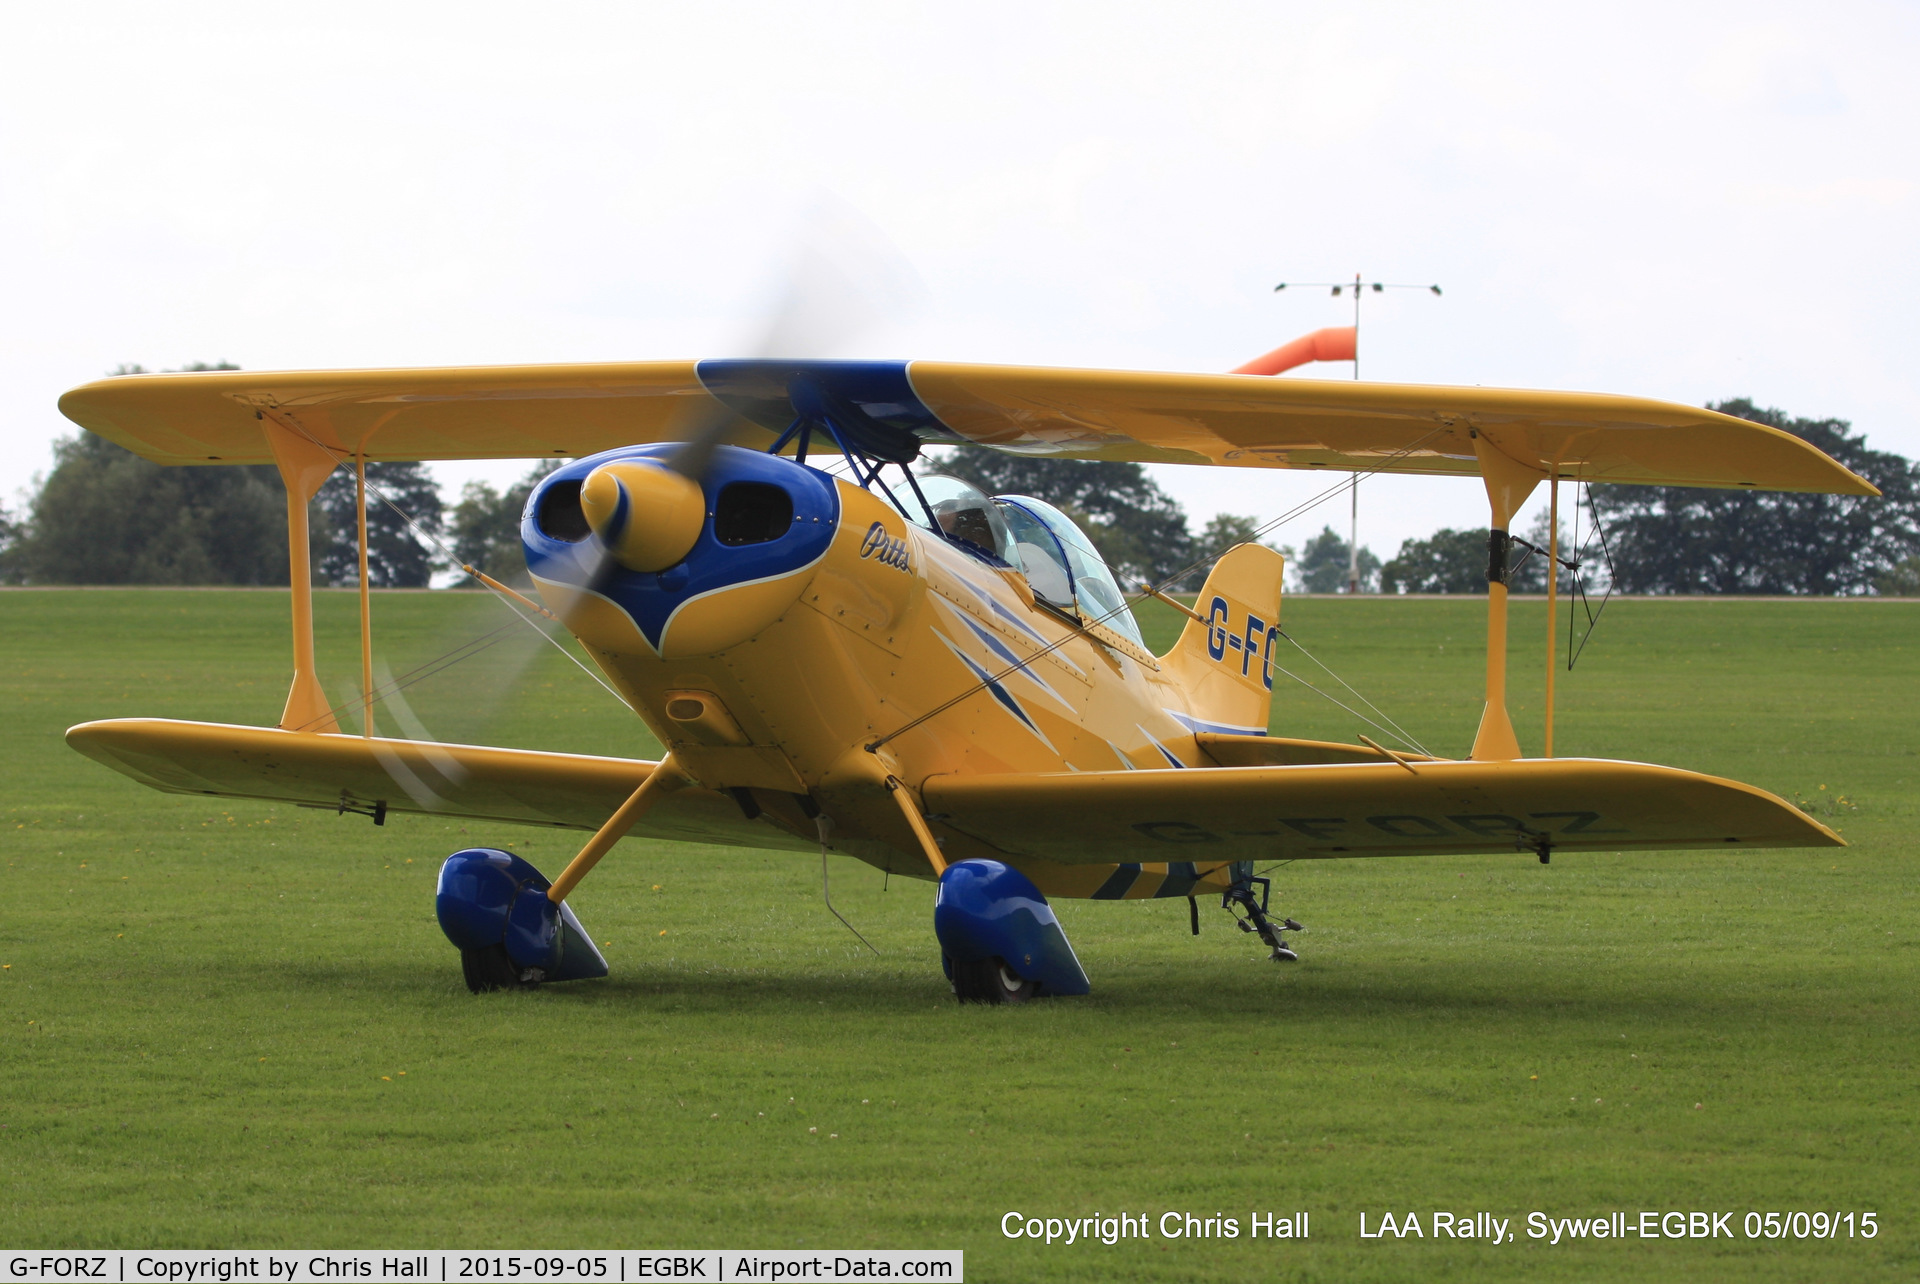 G-FORZ, 1999 Pitts S-1S Special C/N PFA 009-13393, at the LAA Rally 2015, Sywell